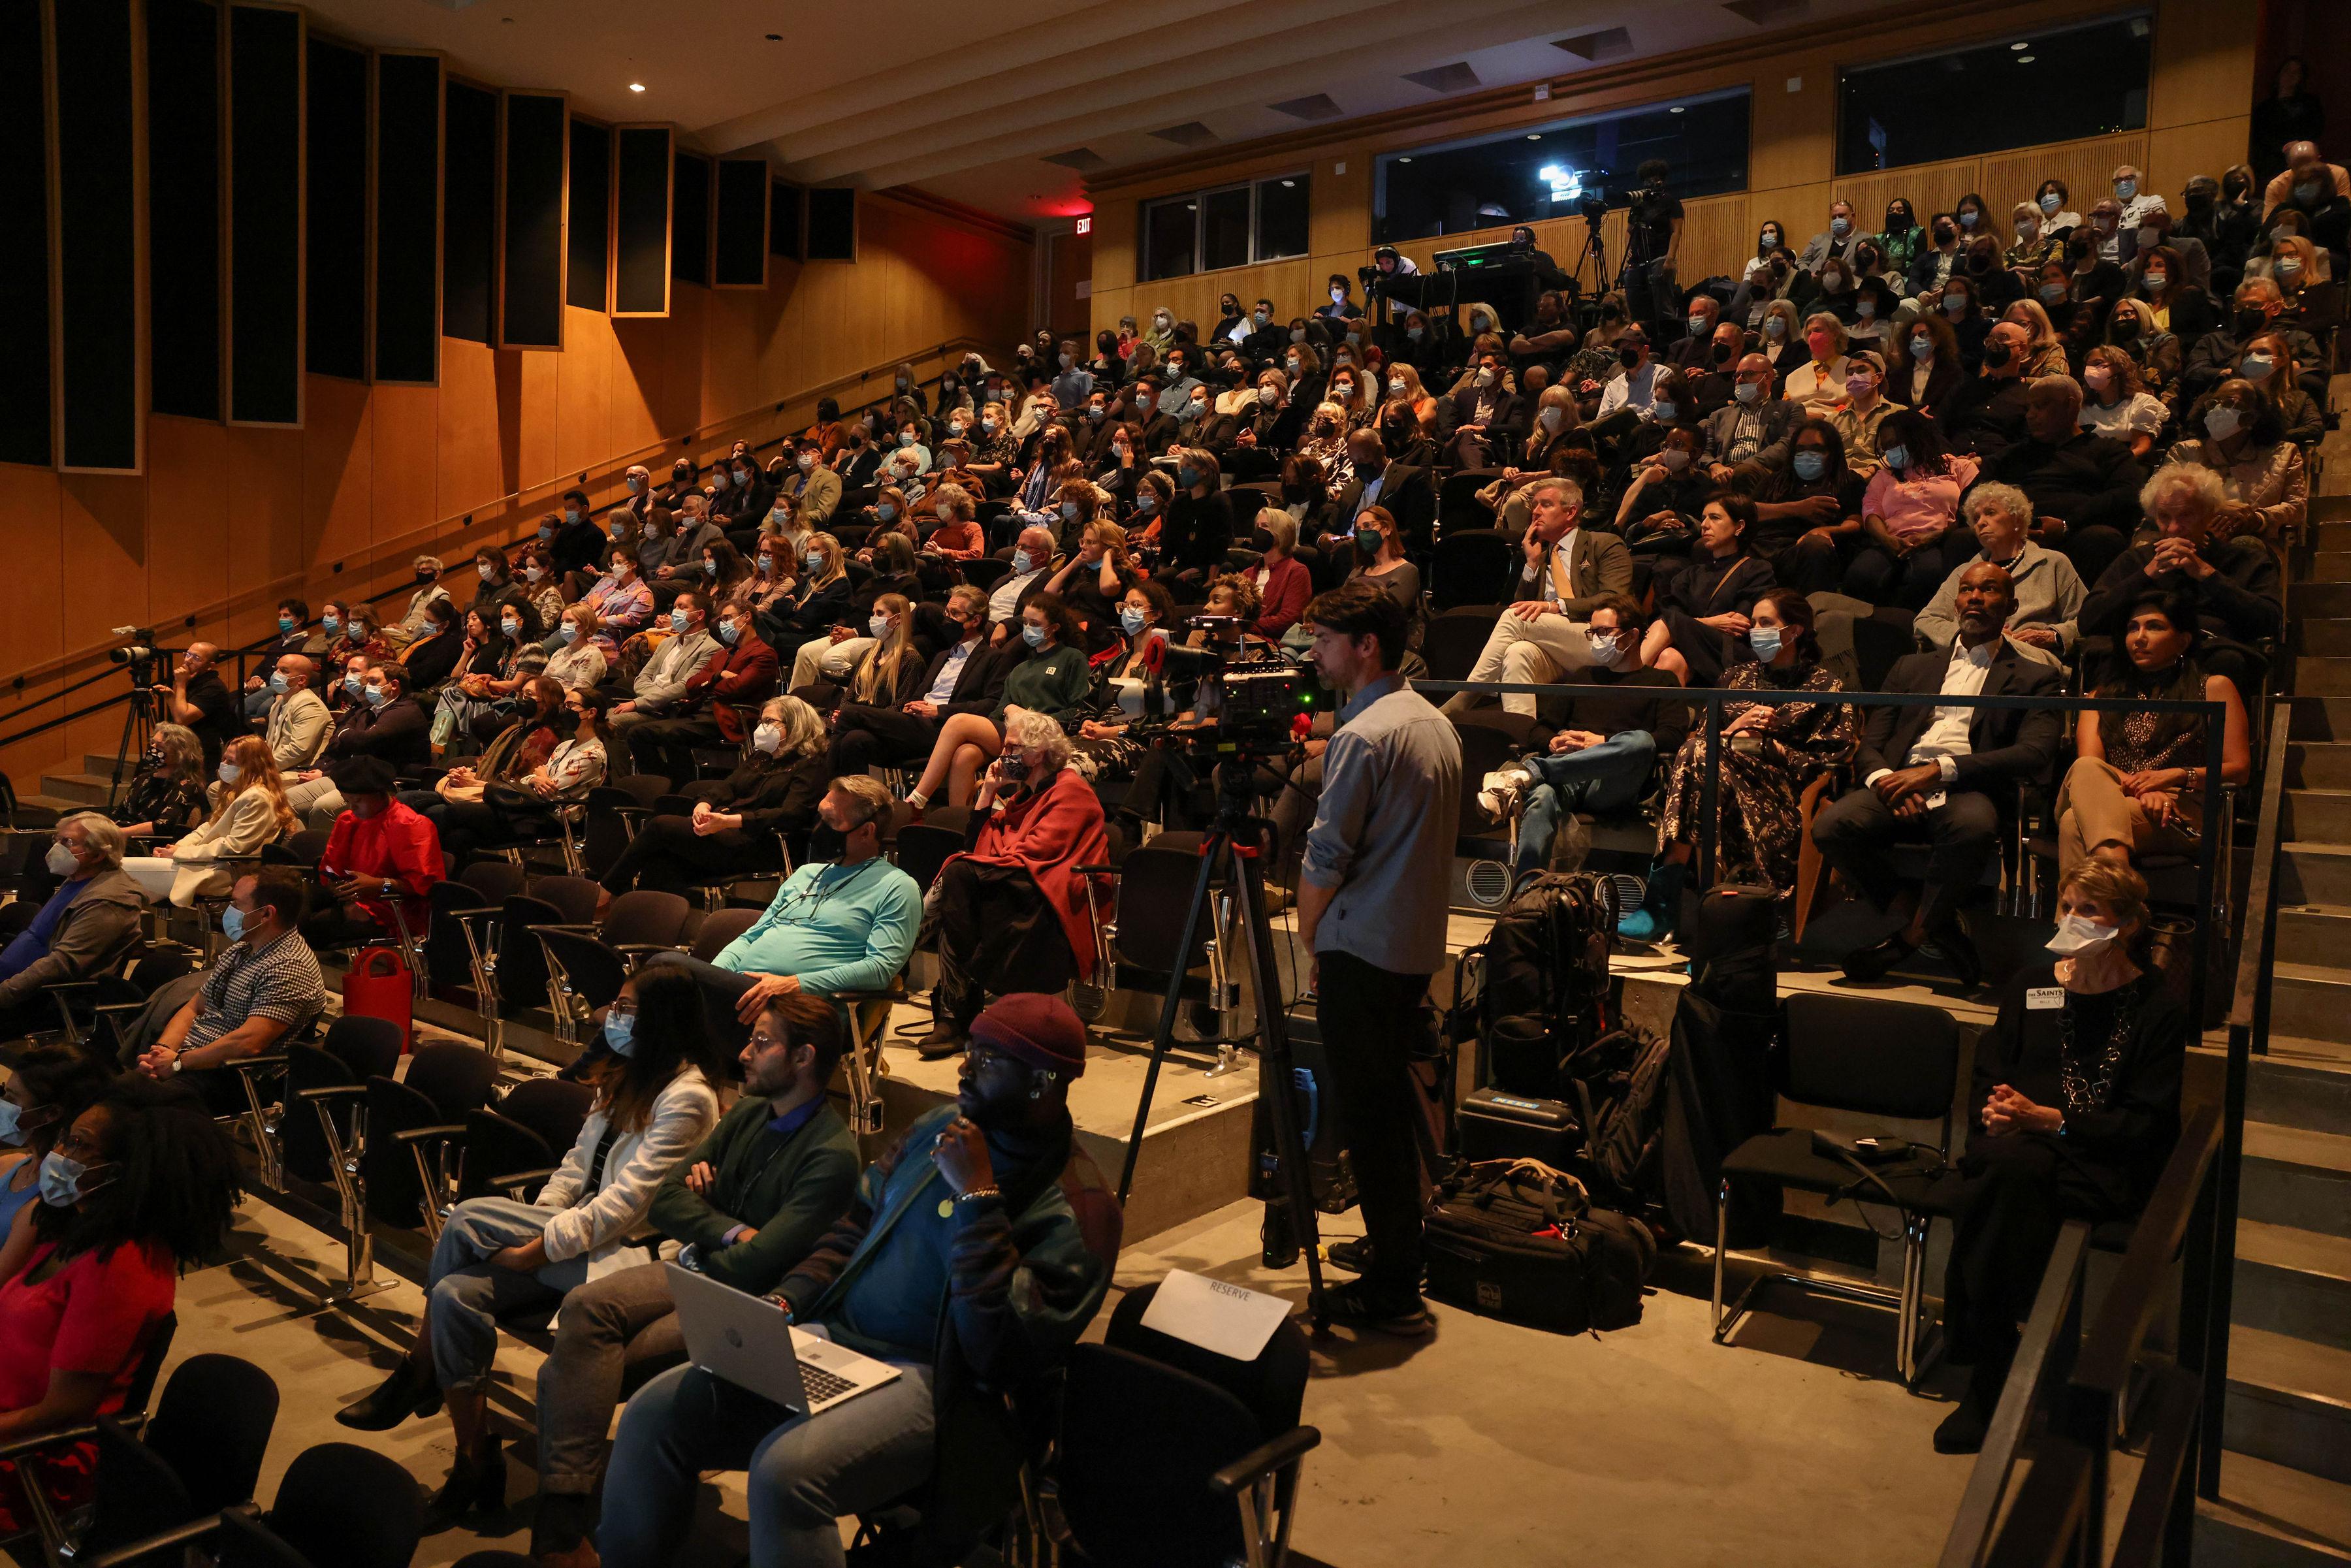 view of audience seated in theater for an event